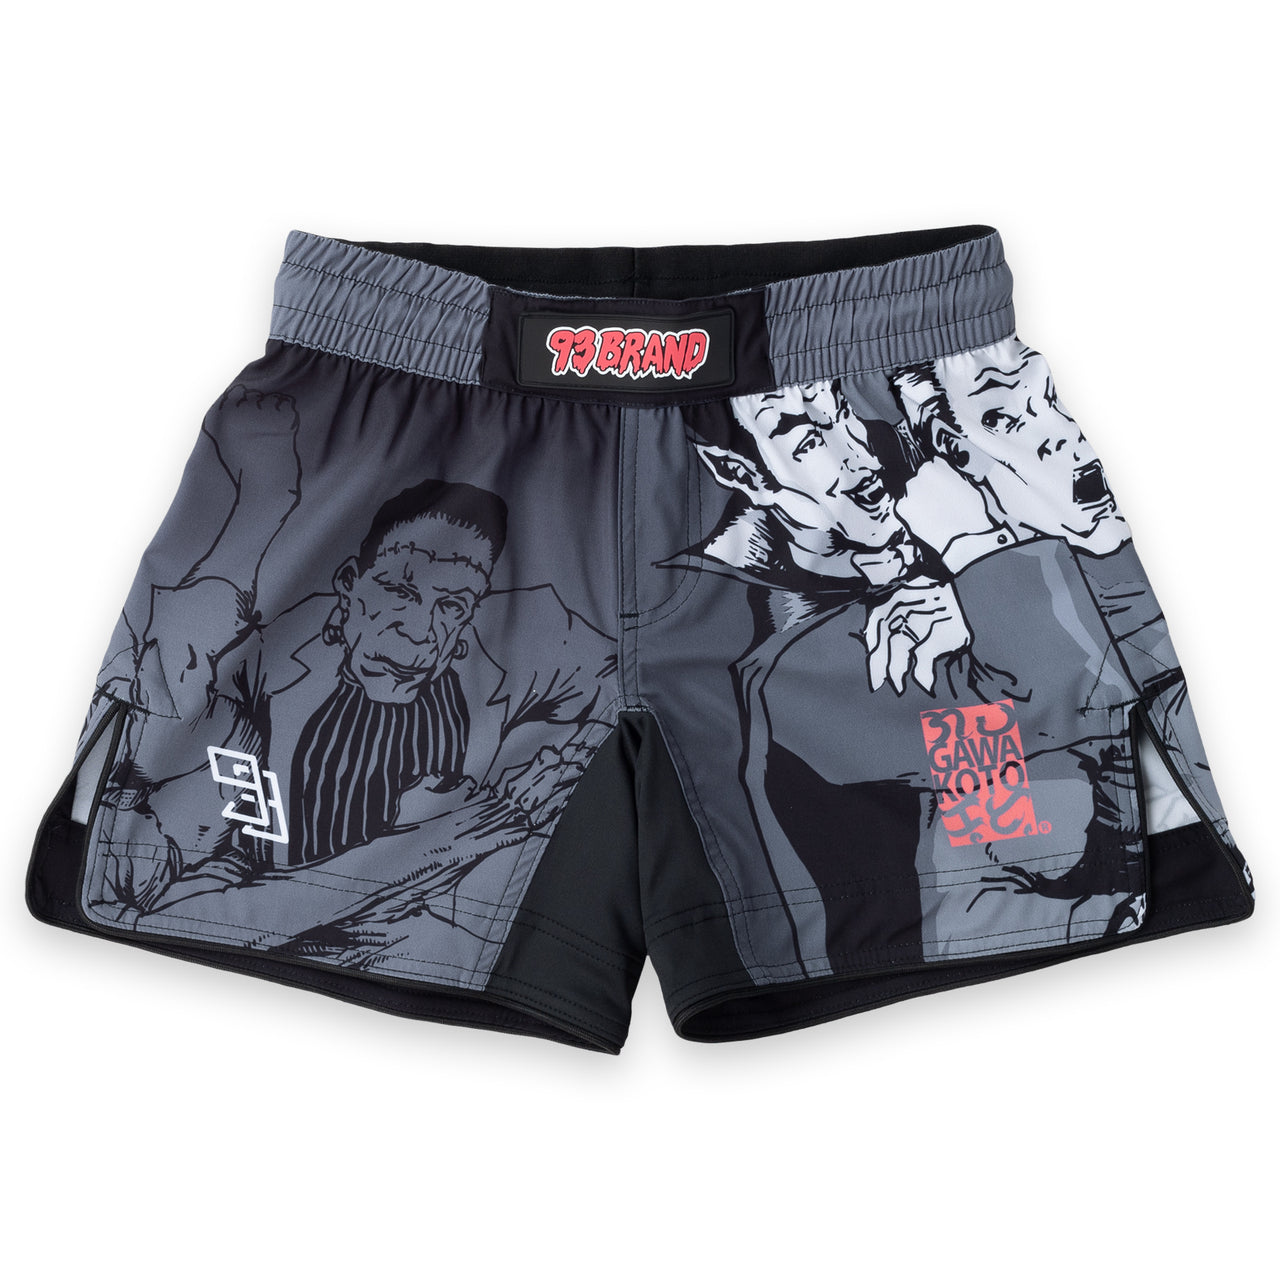 93brand Monsters Women's Grappling Shorts